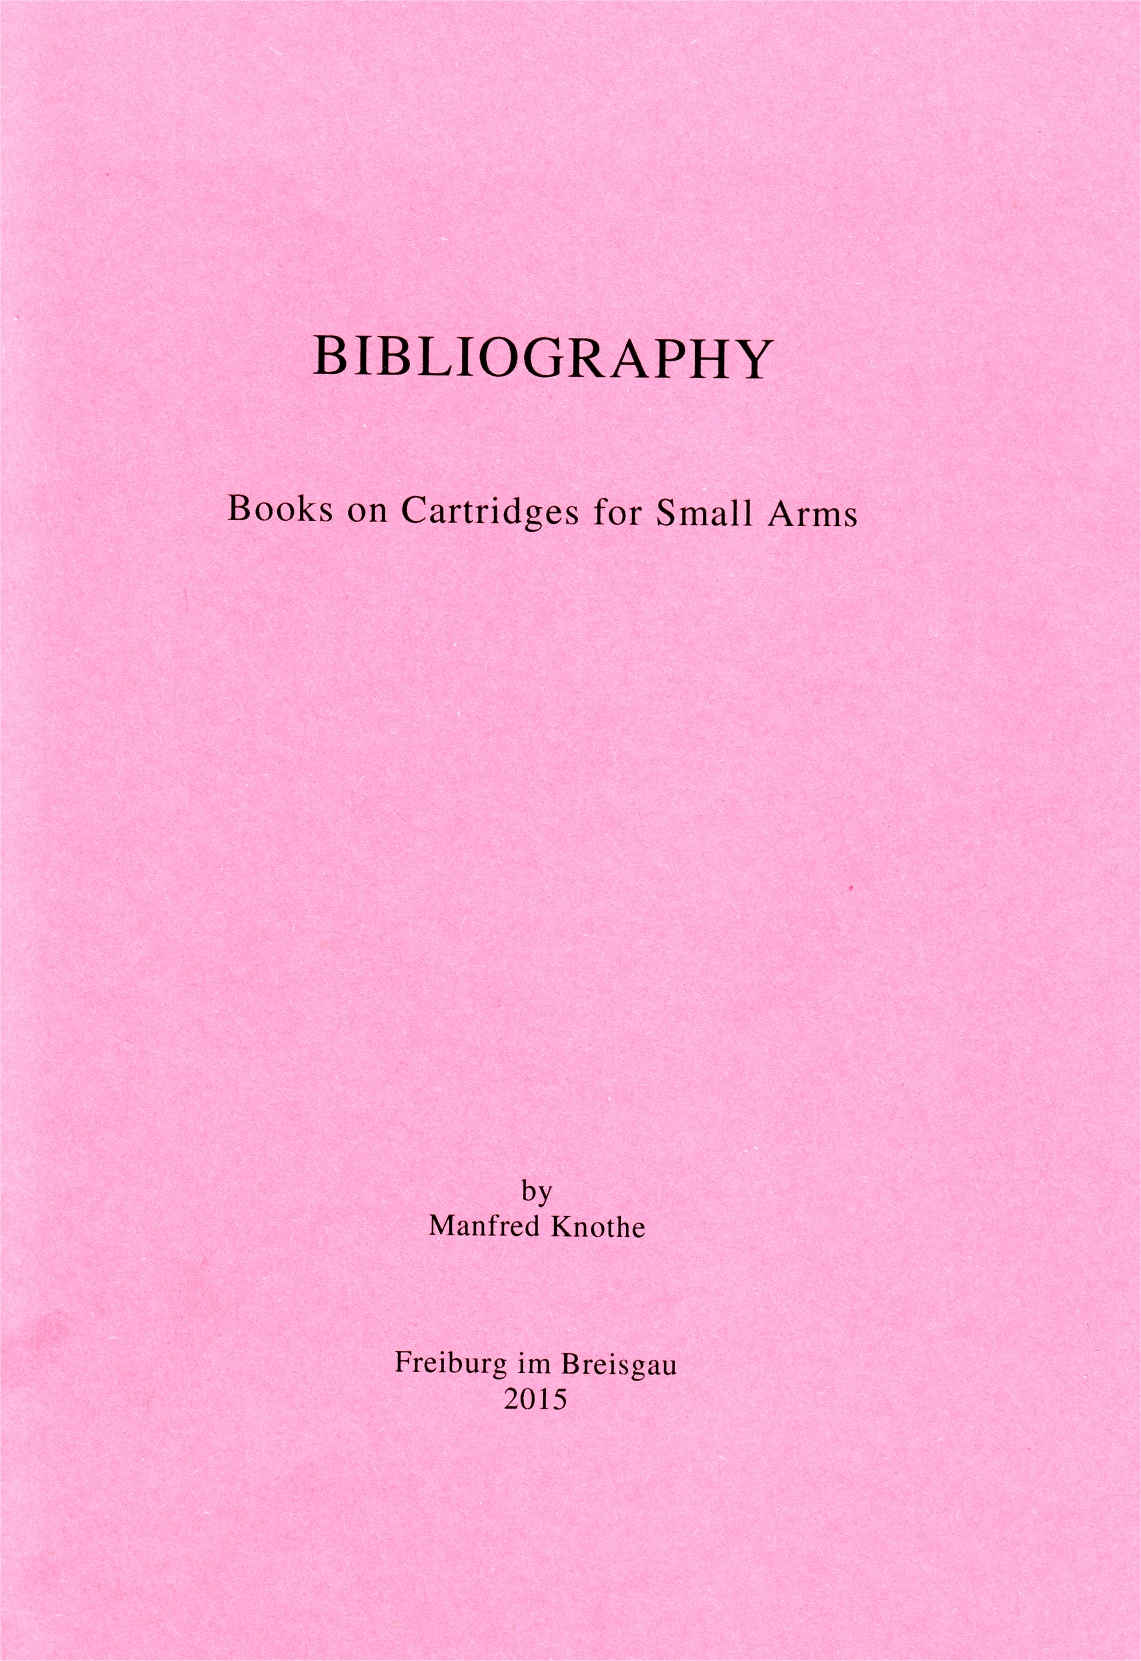 Bibliography by Manfred Knothe